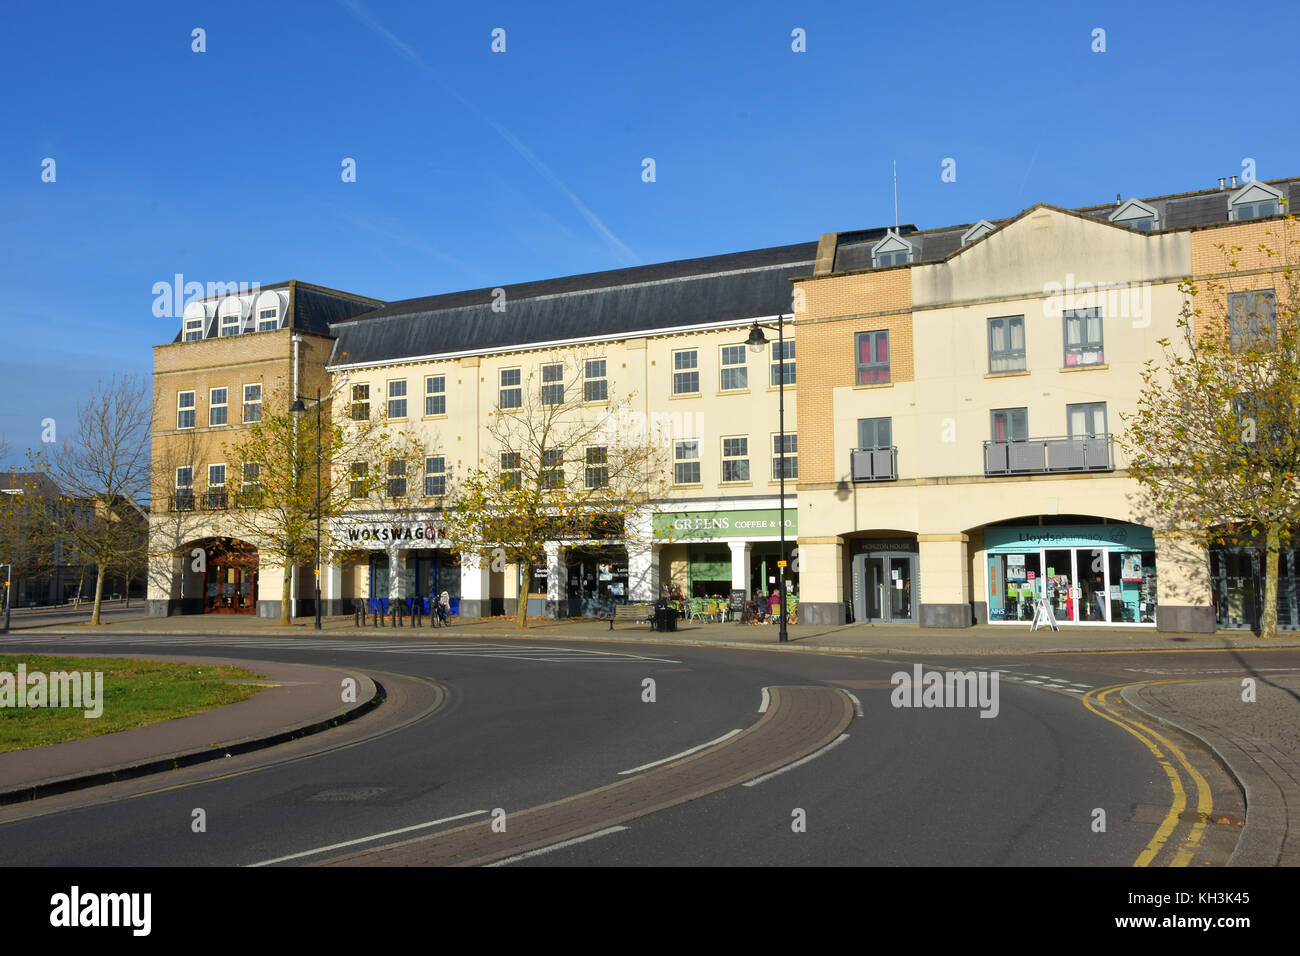 Parade of shops in Cambourne, Cambridgeshire Stock Photo